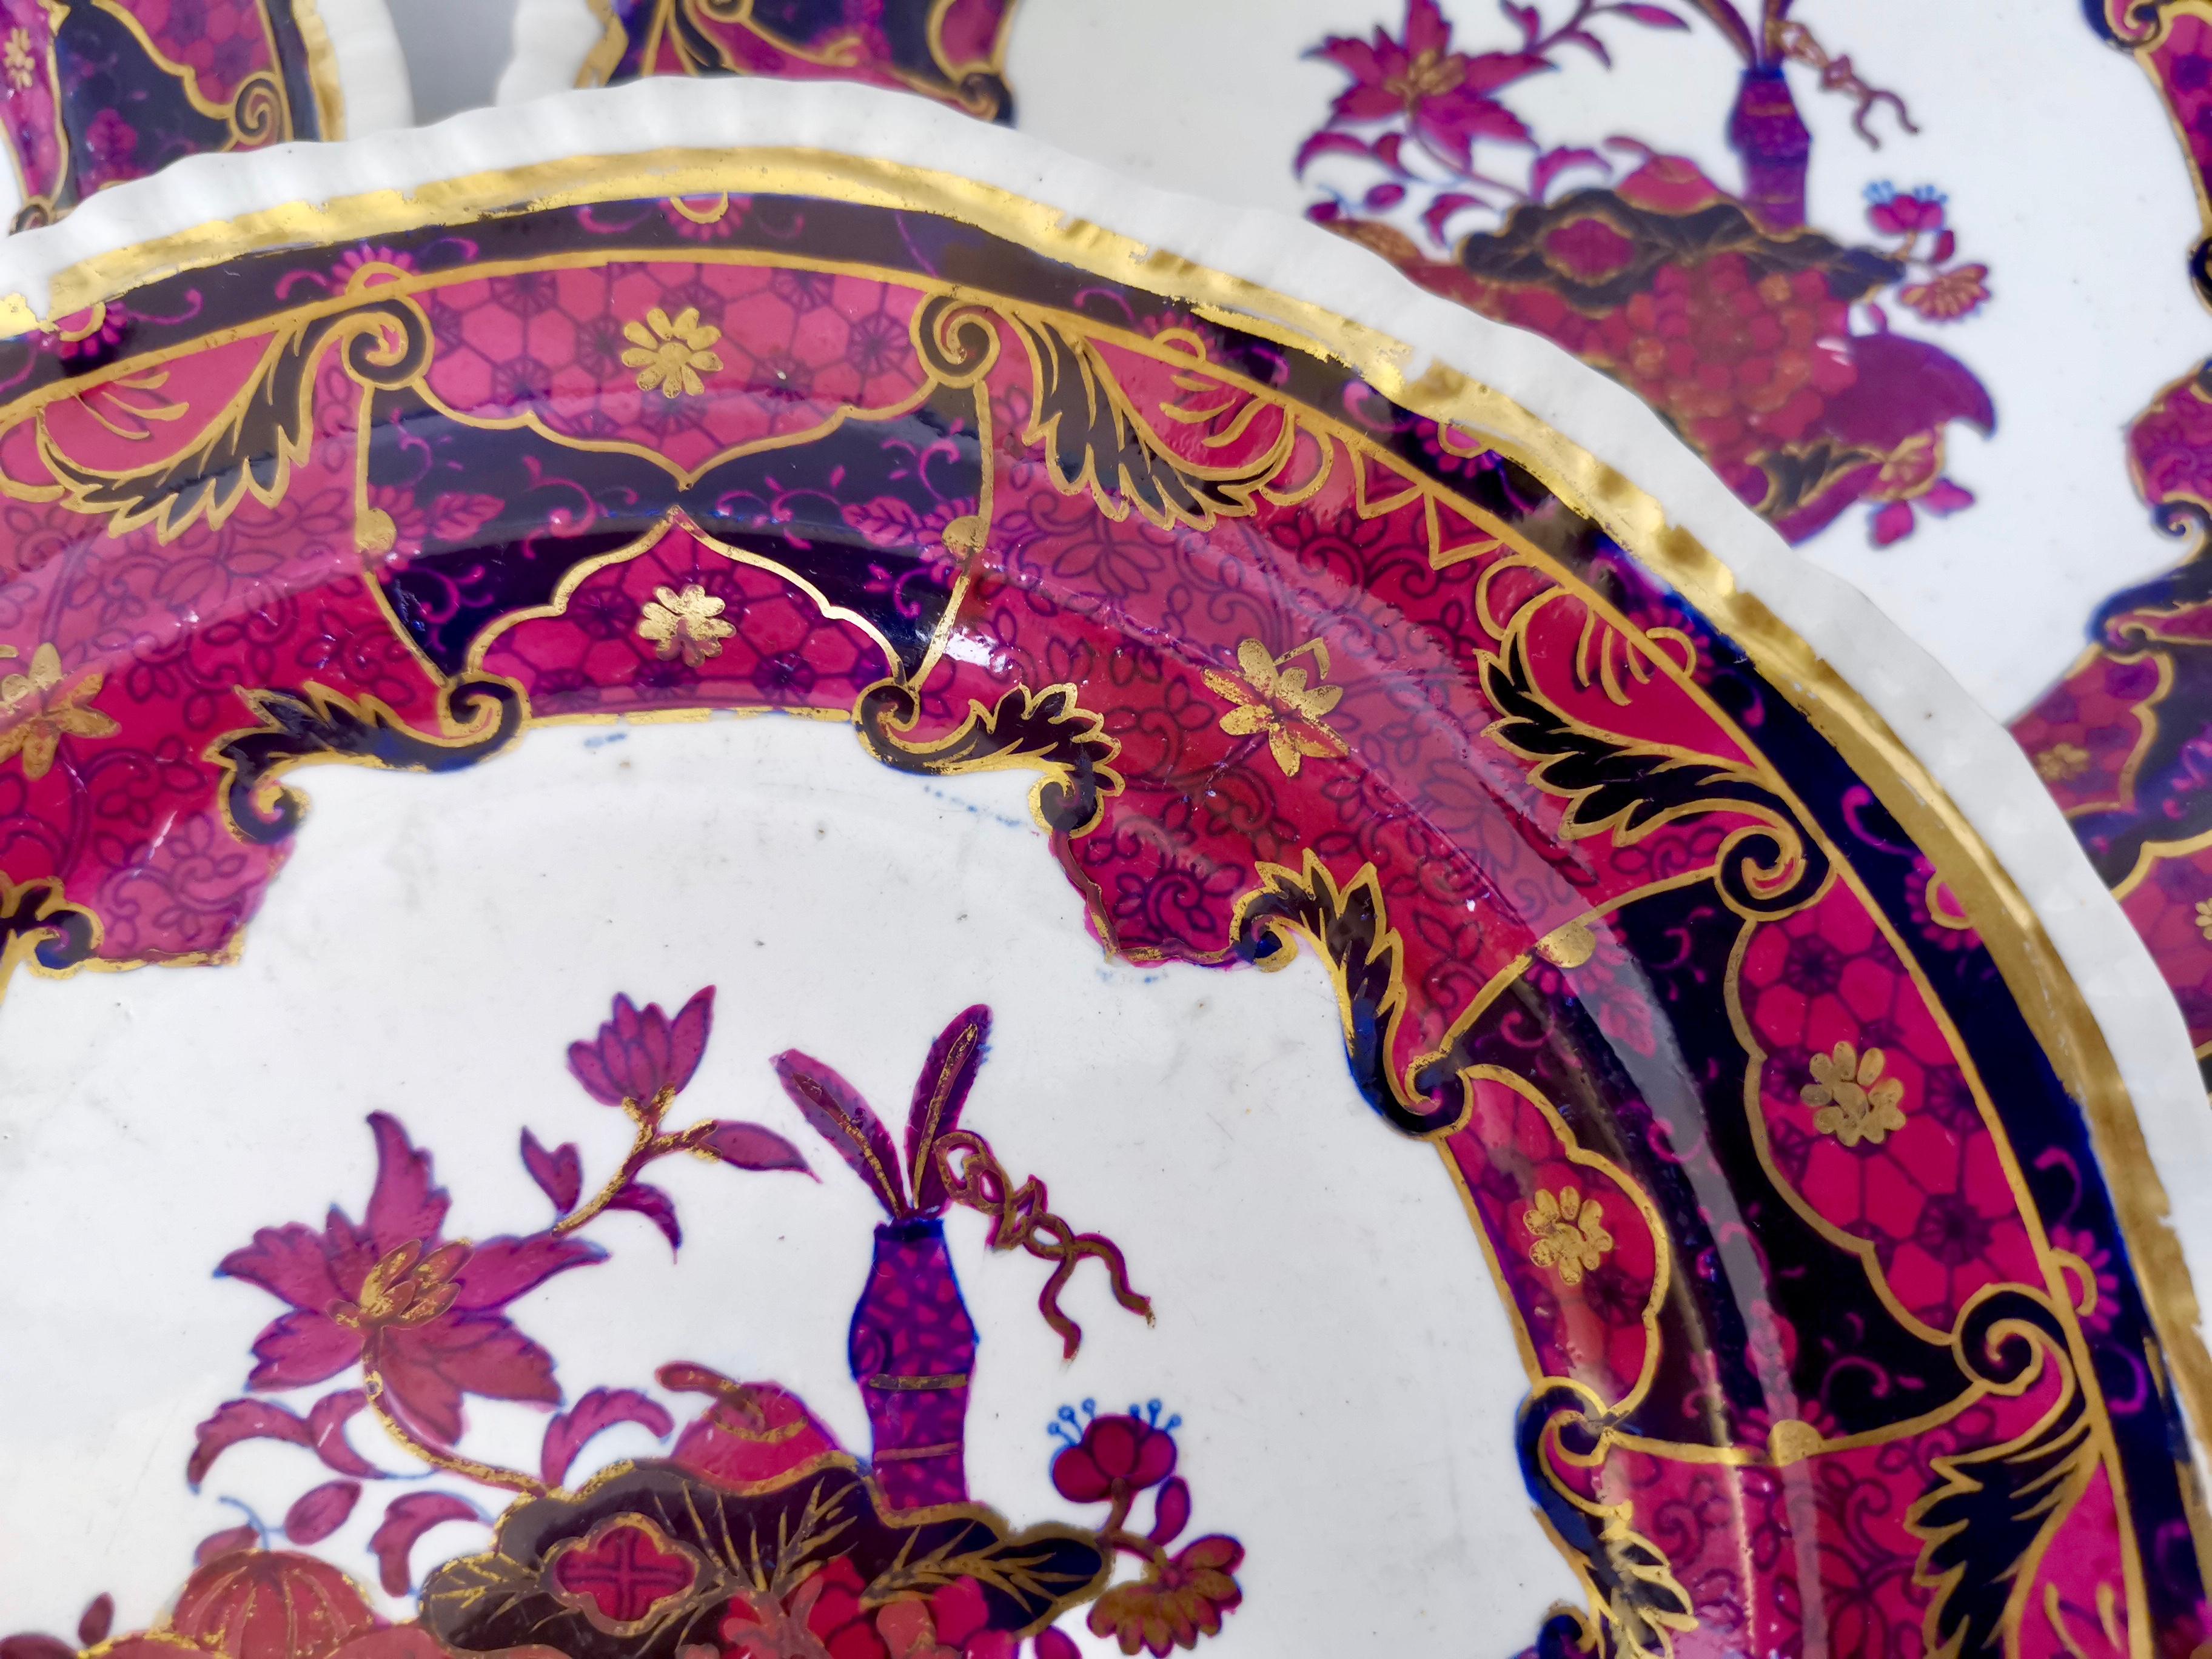 Spode Imperial China Dessert Service, Frog Pattern in Mauve, Regency circa 1828 For Sale 7